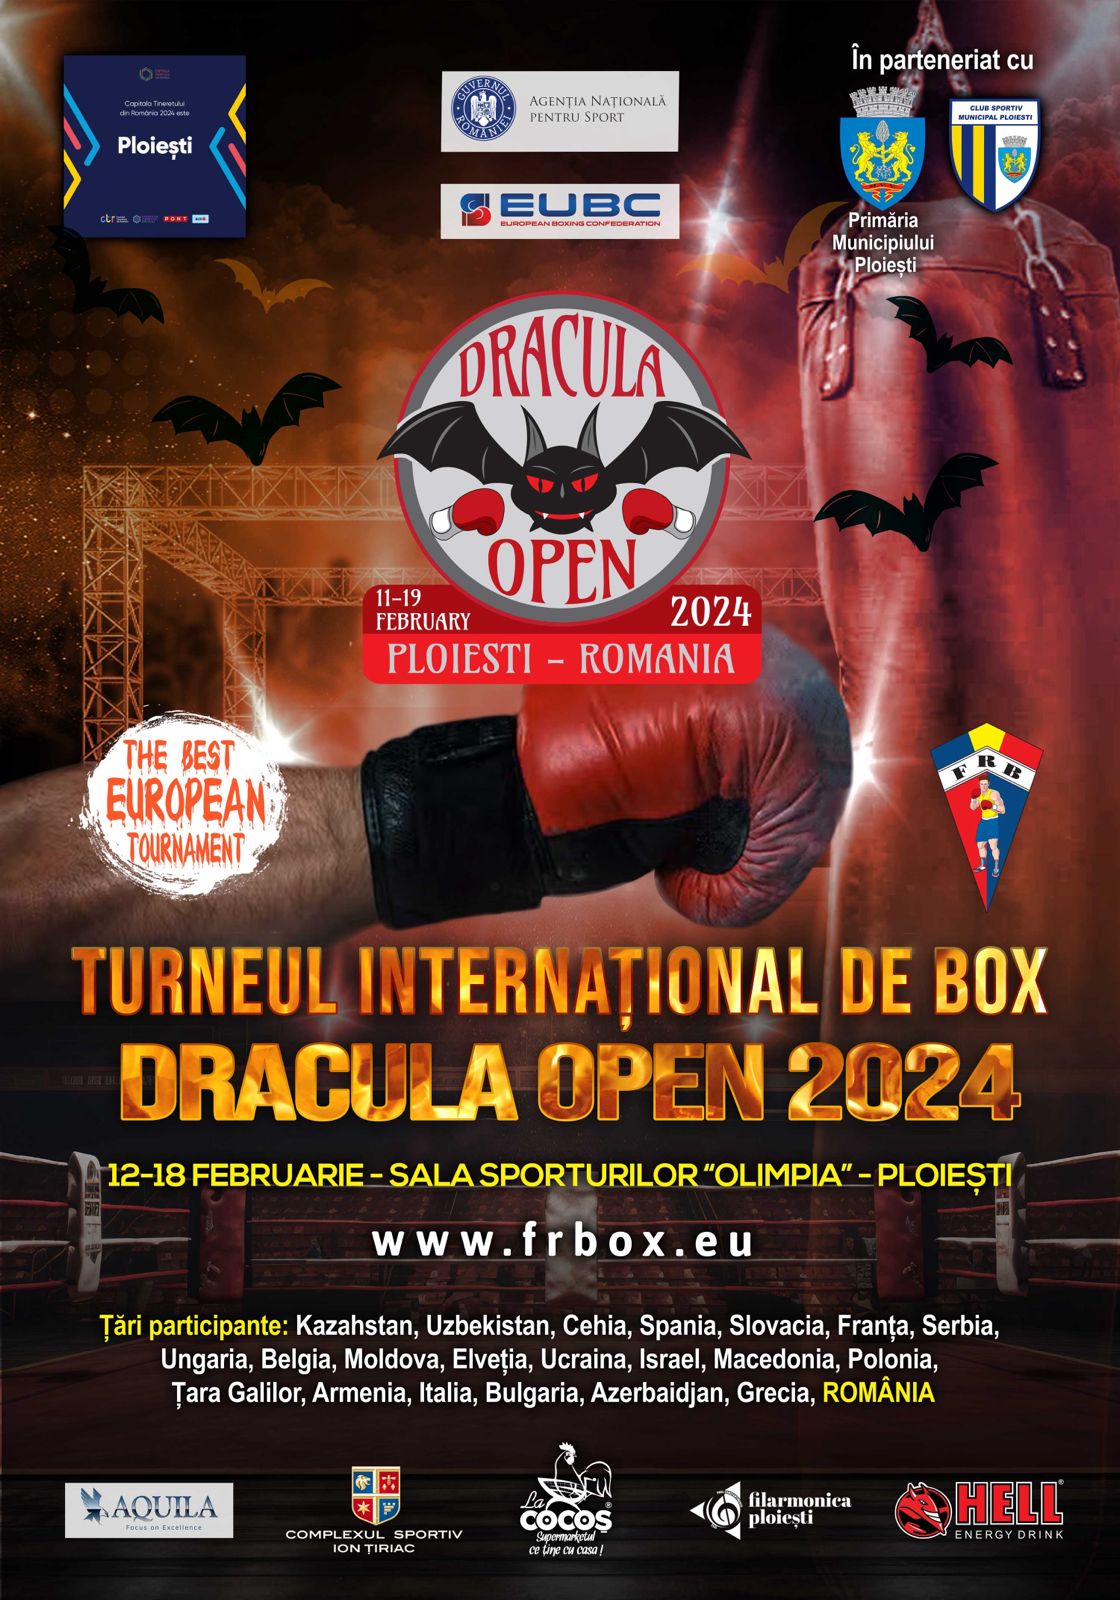 Record number of participants at Dracula Open Tournament: 350 boxers from 22 countries